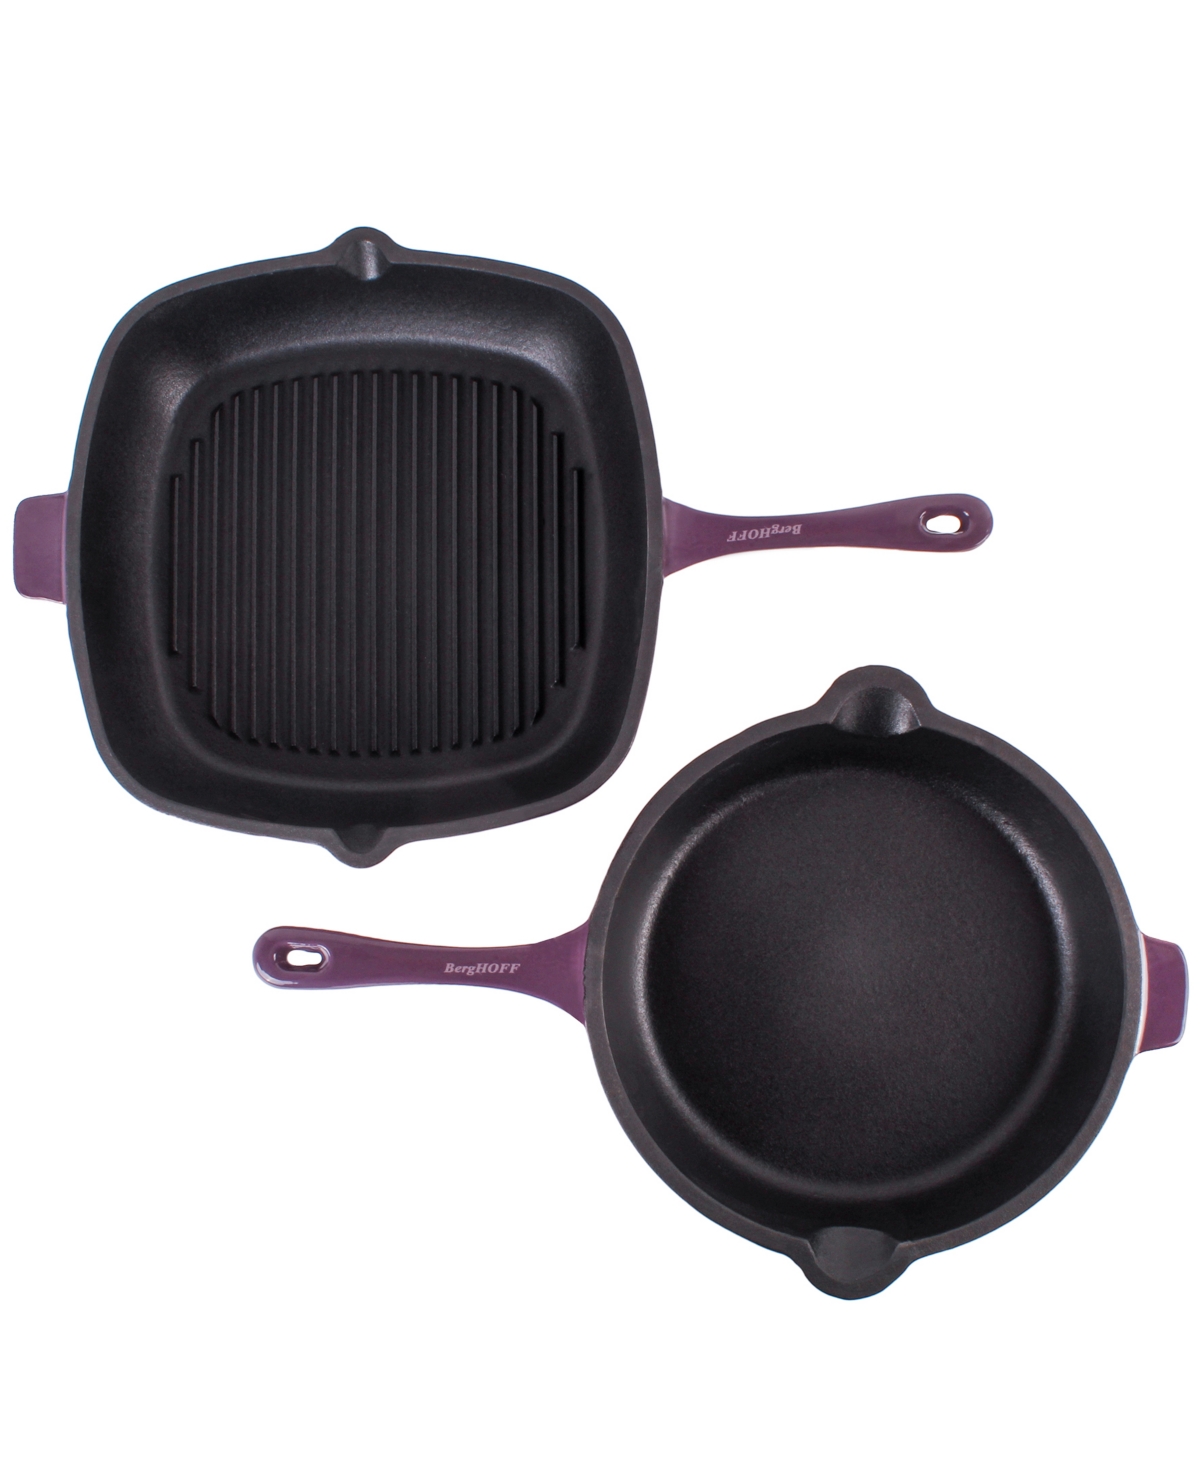 Neo Cast Iron 11 Grill Pan and 10 Fry Pan, Set of 2